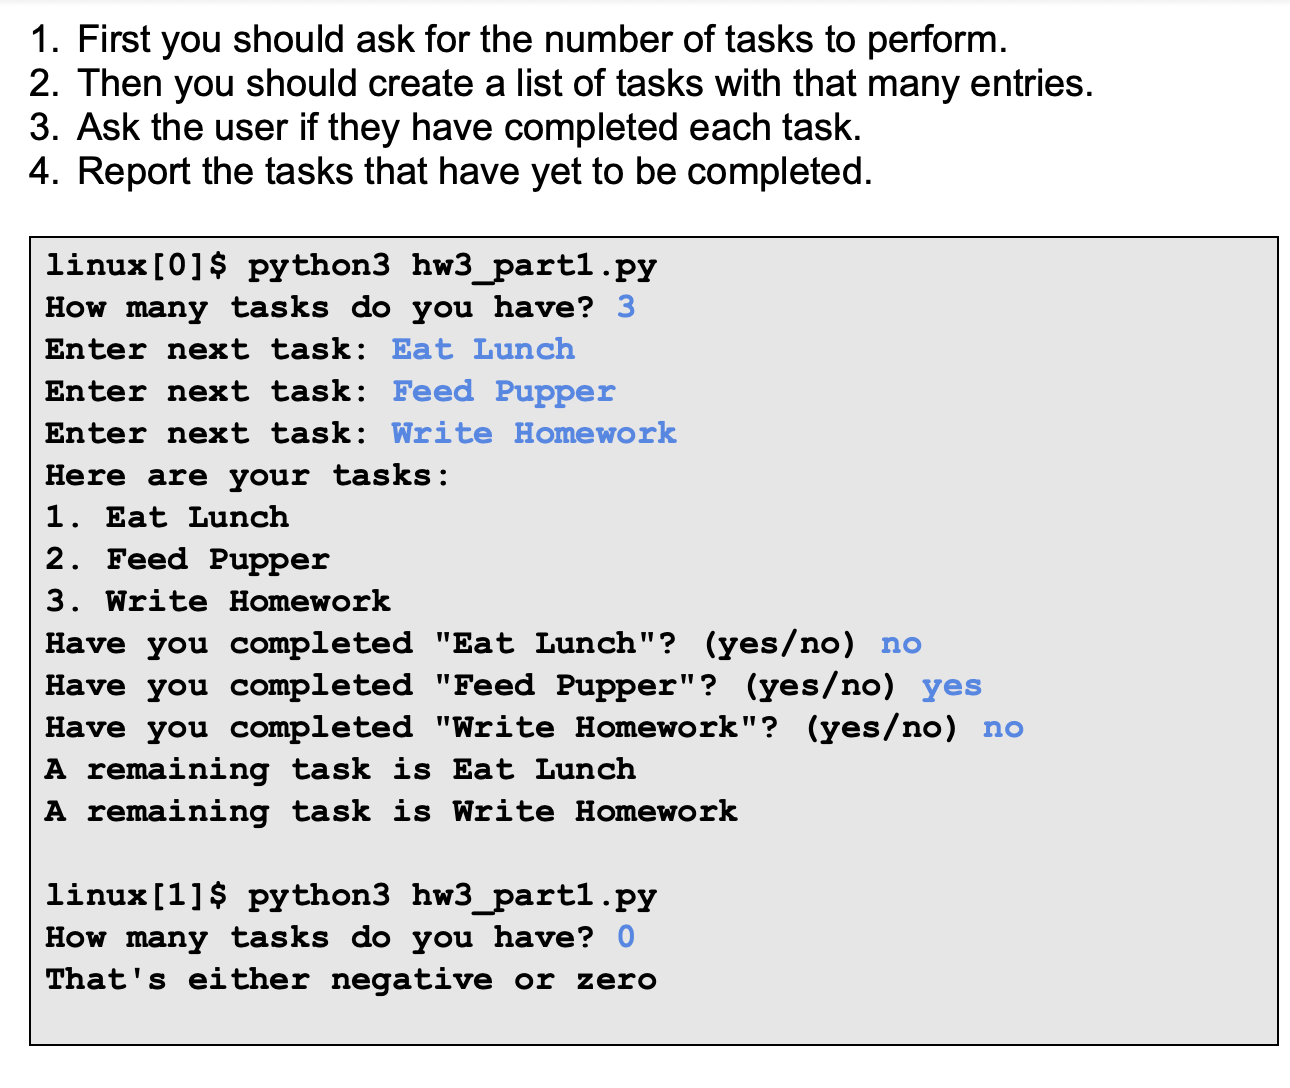 1. First you should ask for the number of tasks to perform.
2. Then you should create a list of tasks with that many entries.
3. Ask the user if they have completed each task.
4. Report the tasks that have yet to be completed.
linux[0]$ python3 hw3_part1.py
How many tasks do you have? 3
Enter next task: Eat Lunch
Enter next task: Feed Pupper
Enter next task: Write Homework
Here are your tasks:
1. Eat Lunch
2. Feed Pupper
3. Write Homework
Have you completed "Eat Lunch"? (yes/no) no
Have you completed "Feed Pupper"? (yes/no) yes
Have you completed "Write Homework"? (yes/no) no
A remaining task is Eat Lunch
A remaining task is Write Homework
linux[1]$ python3 hw3_part1.py
How many tasks do you have? 0
That's either negative or zero
